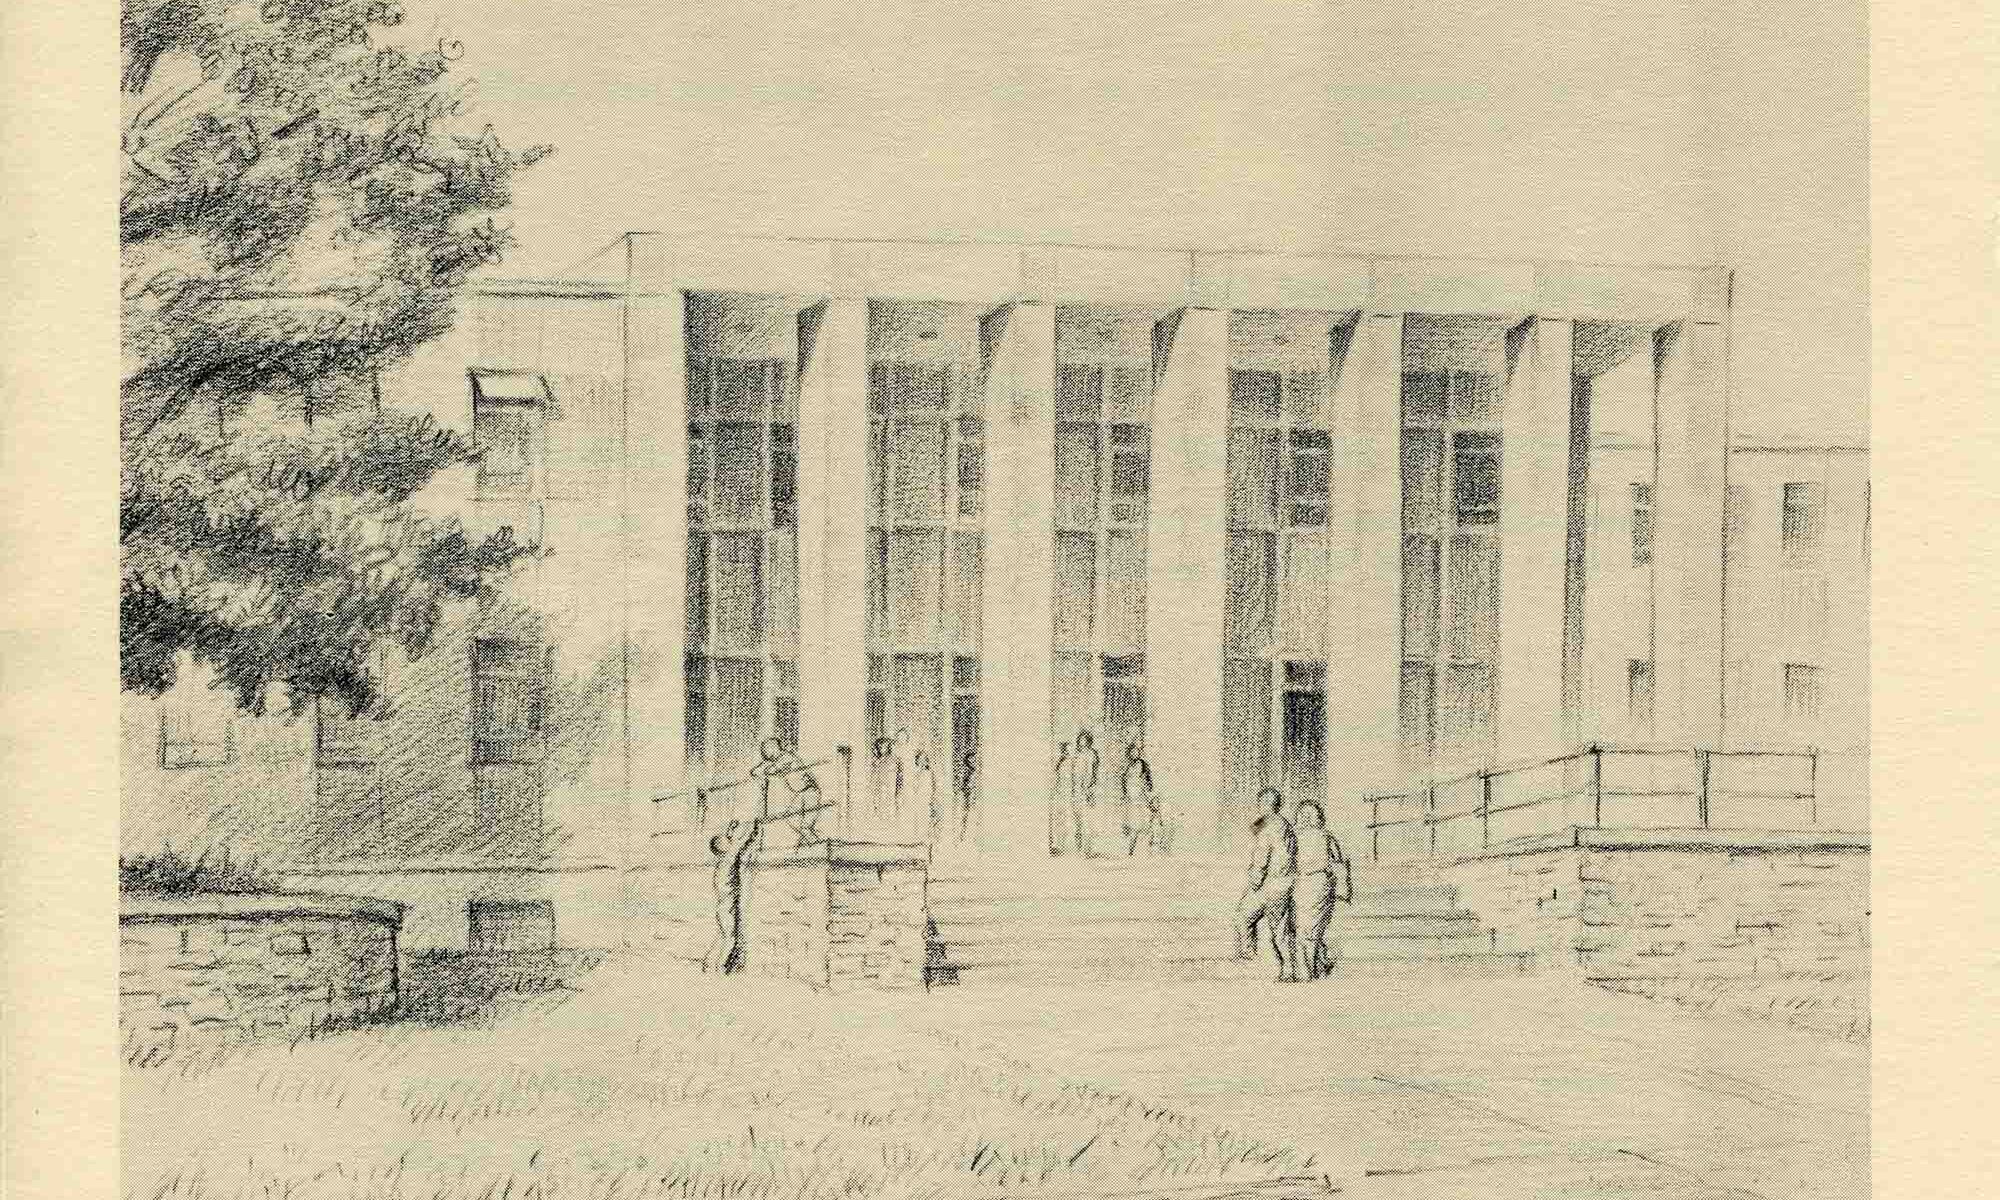 A sketch of the JCC building in 1960.